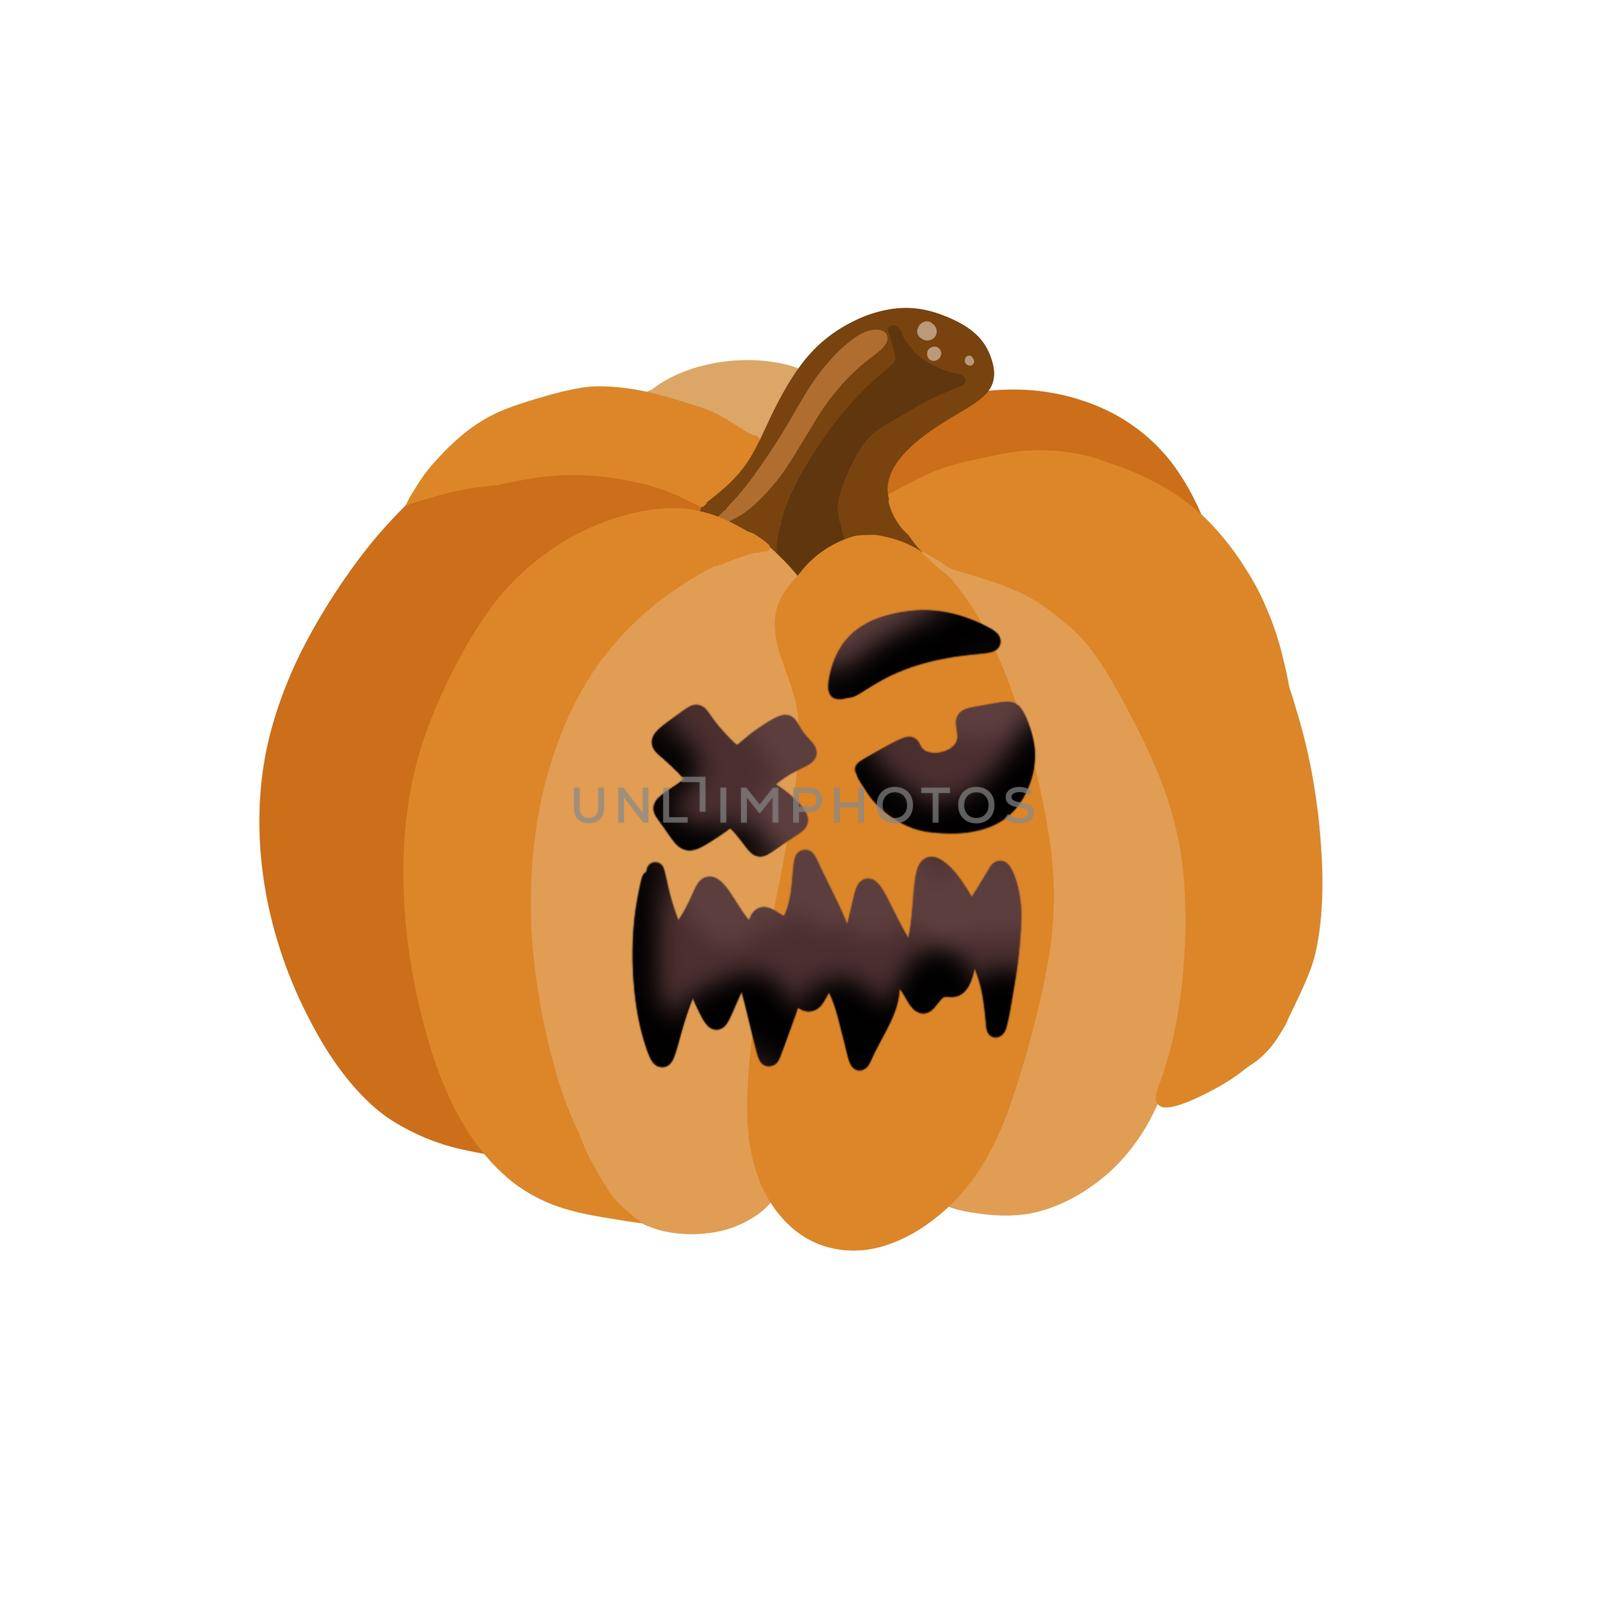 The main symbol of the holiday Happy Halloween. Orange pumpkin with a hike for your design for the Halloween holiday. Previous illustration